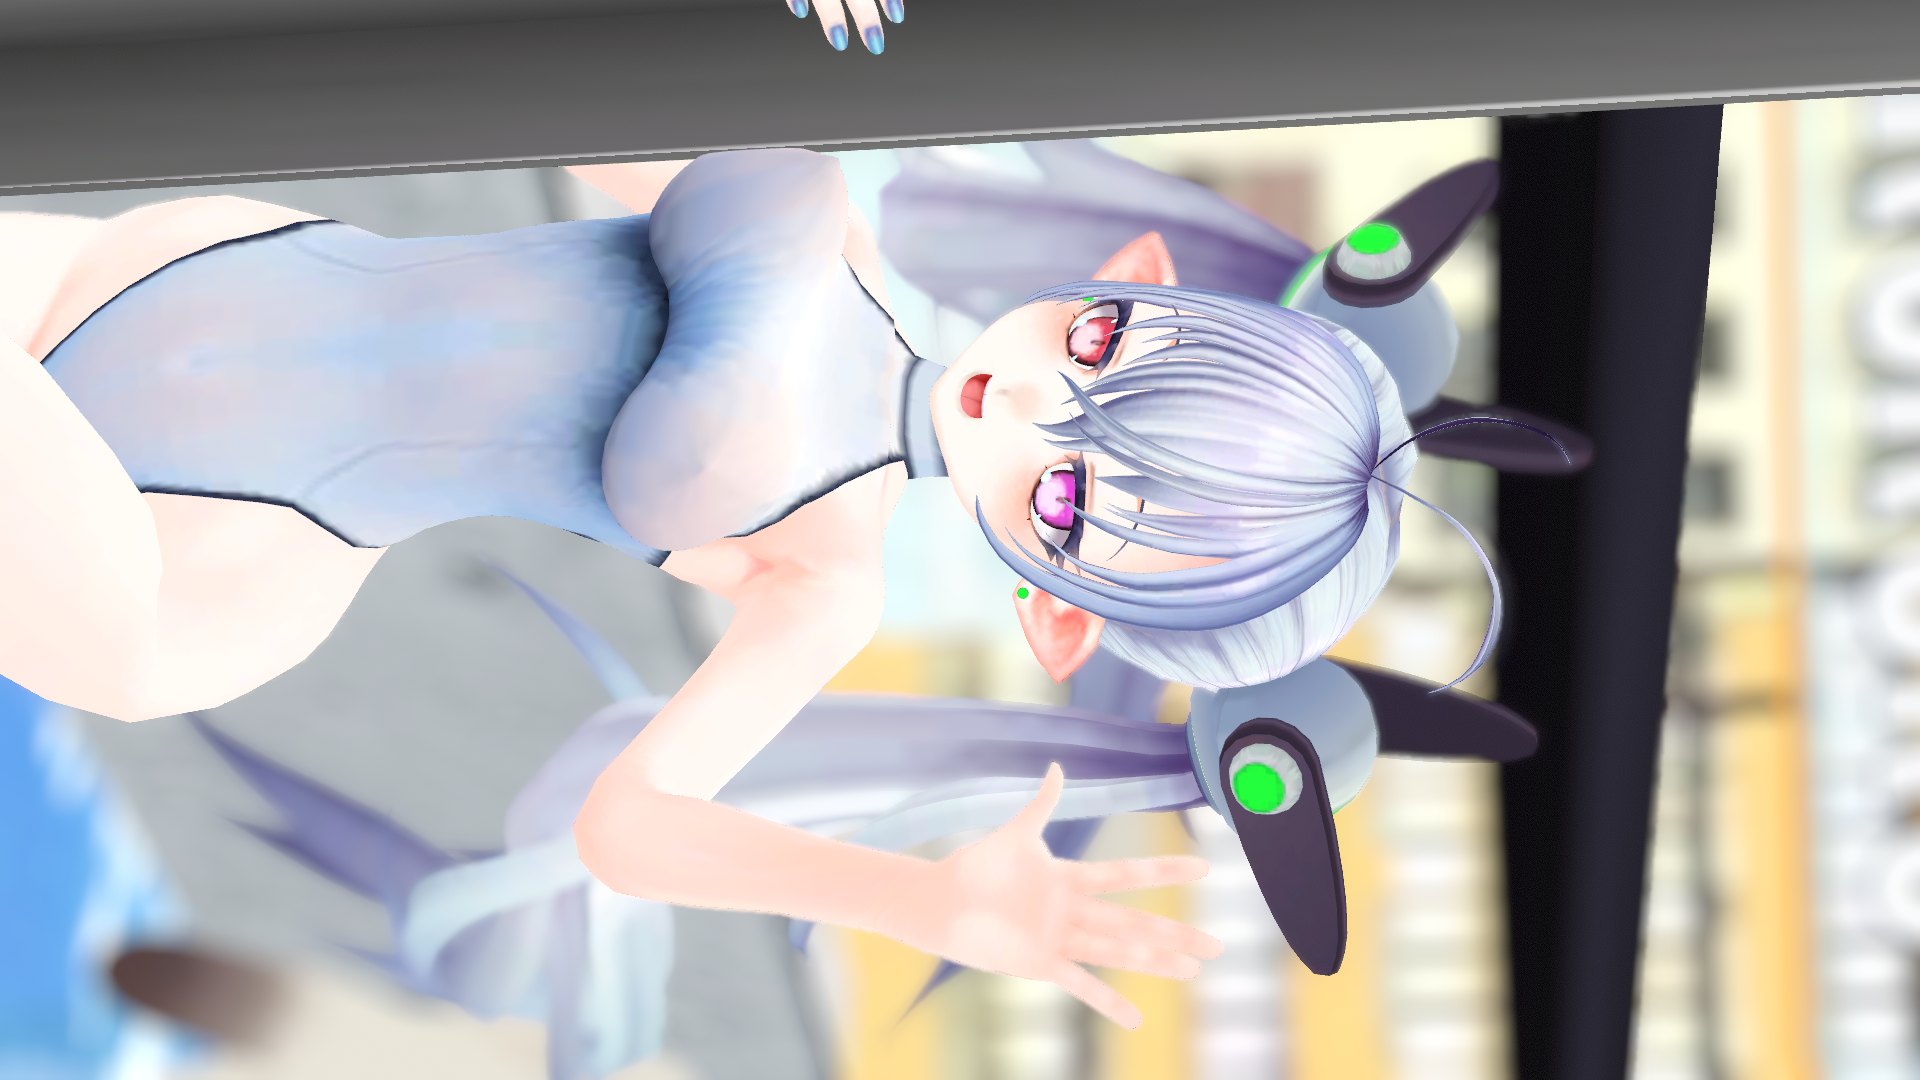 VRChat_1920x1080_2021-12-05_06-07-18.072.png